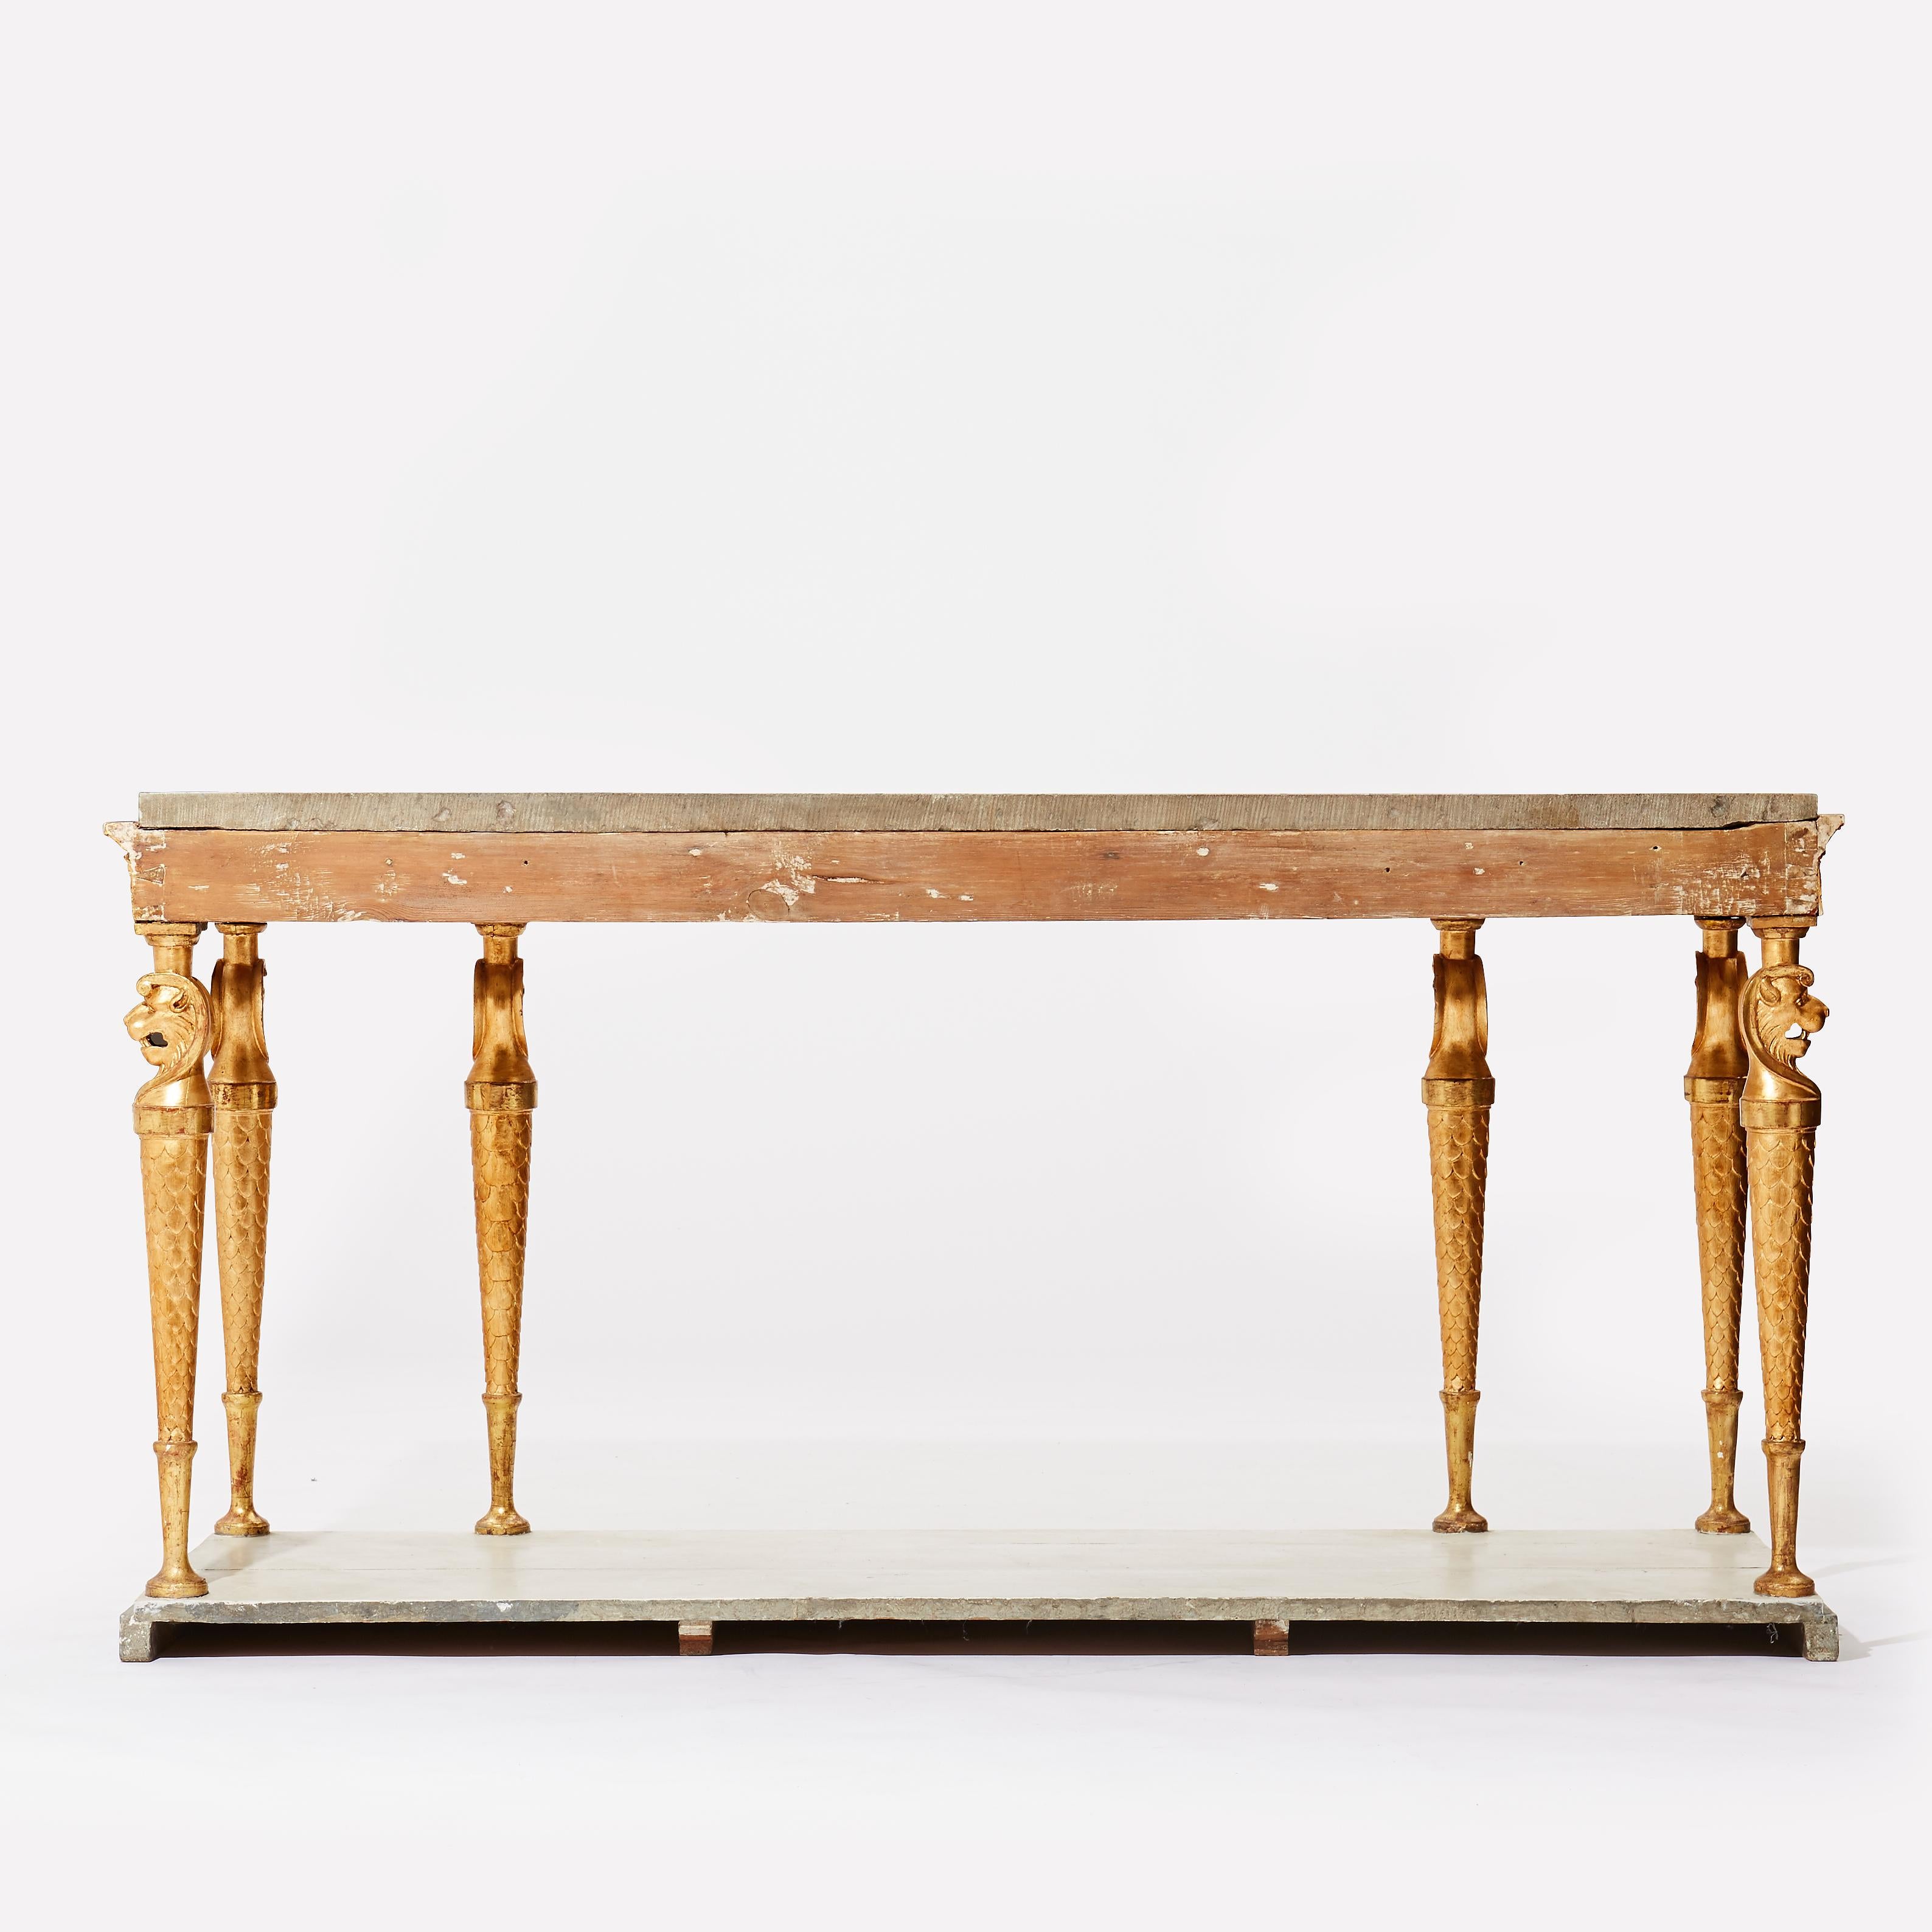 A Swedish Empire Gilt wood Console Table, Marble Top, Early 19th Century 1